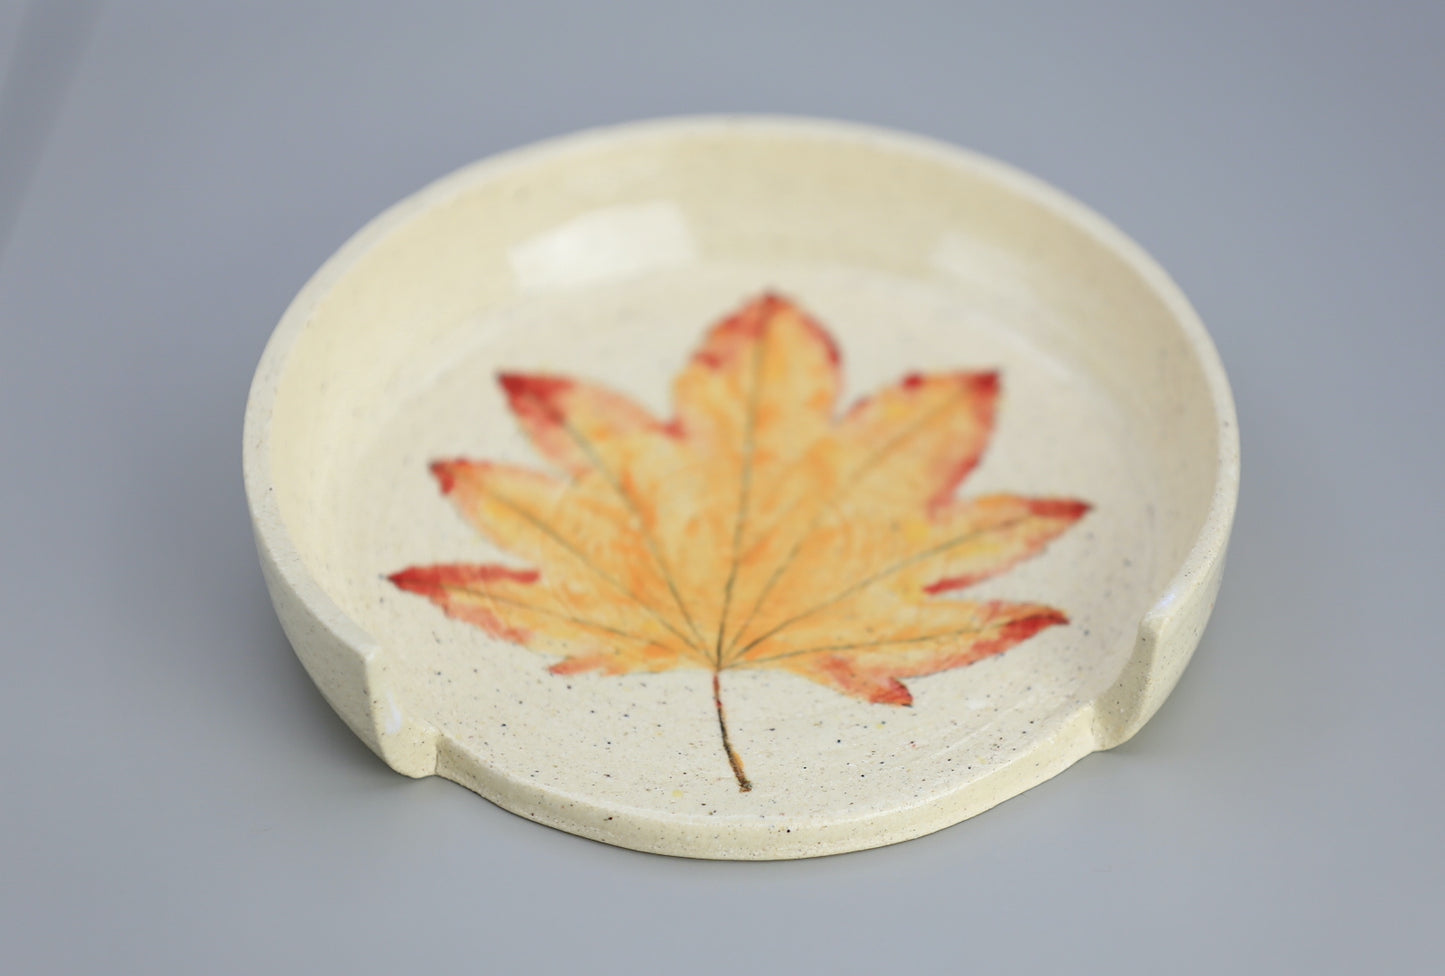 Ceramic spoon rest with handpainted leaf motif